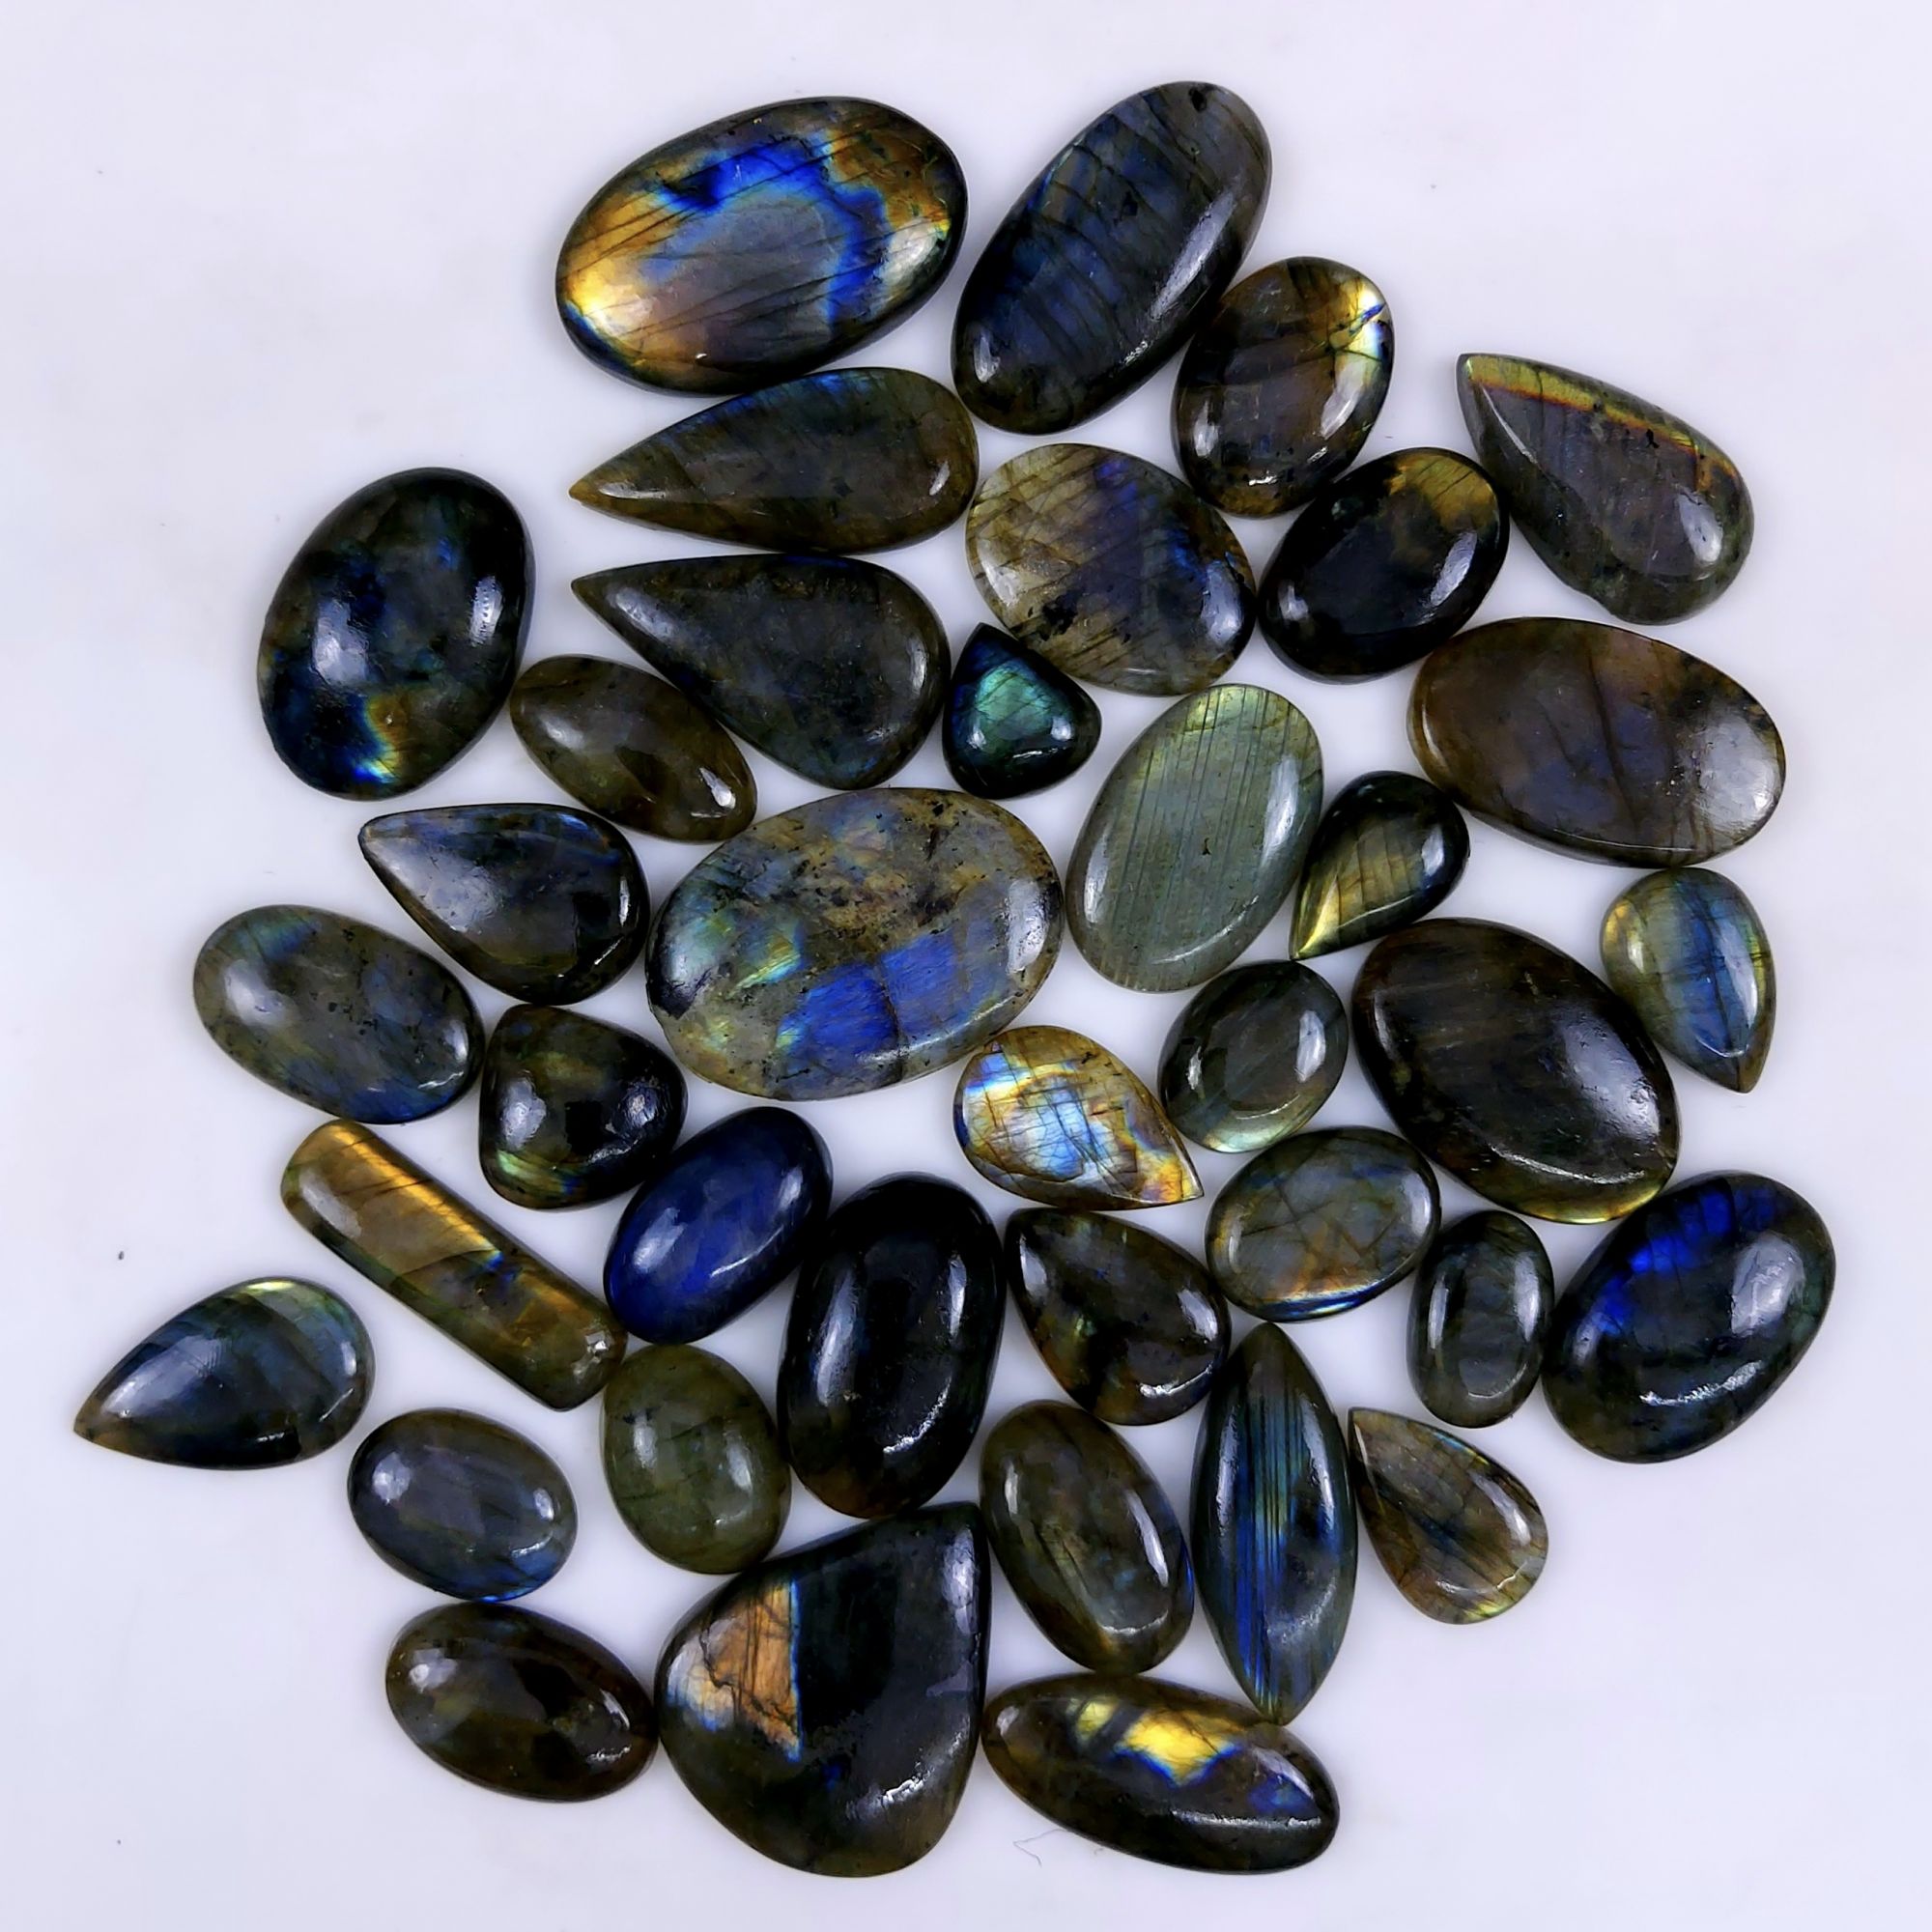 38pc 1370Cts Labradorite Cabochon Multifire Healing Crystal For Jewelry Supplies, Labradorite Necklace Handmade Wire Wrapped Gemstone Pendant 45x30 15x12mm#6326